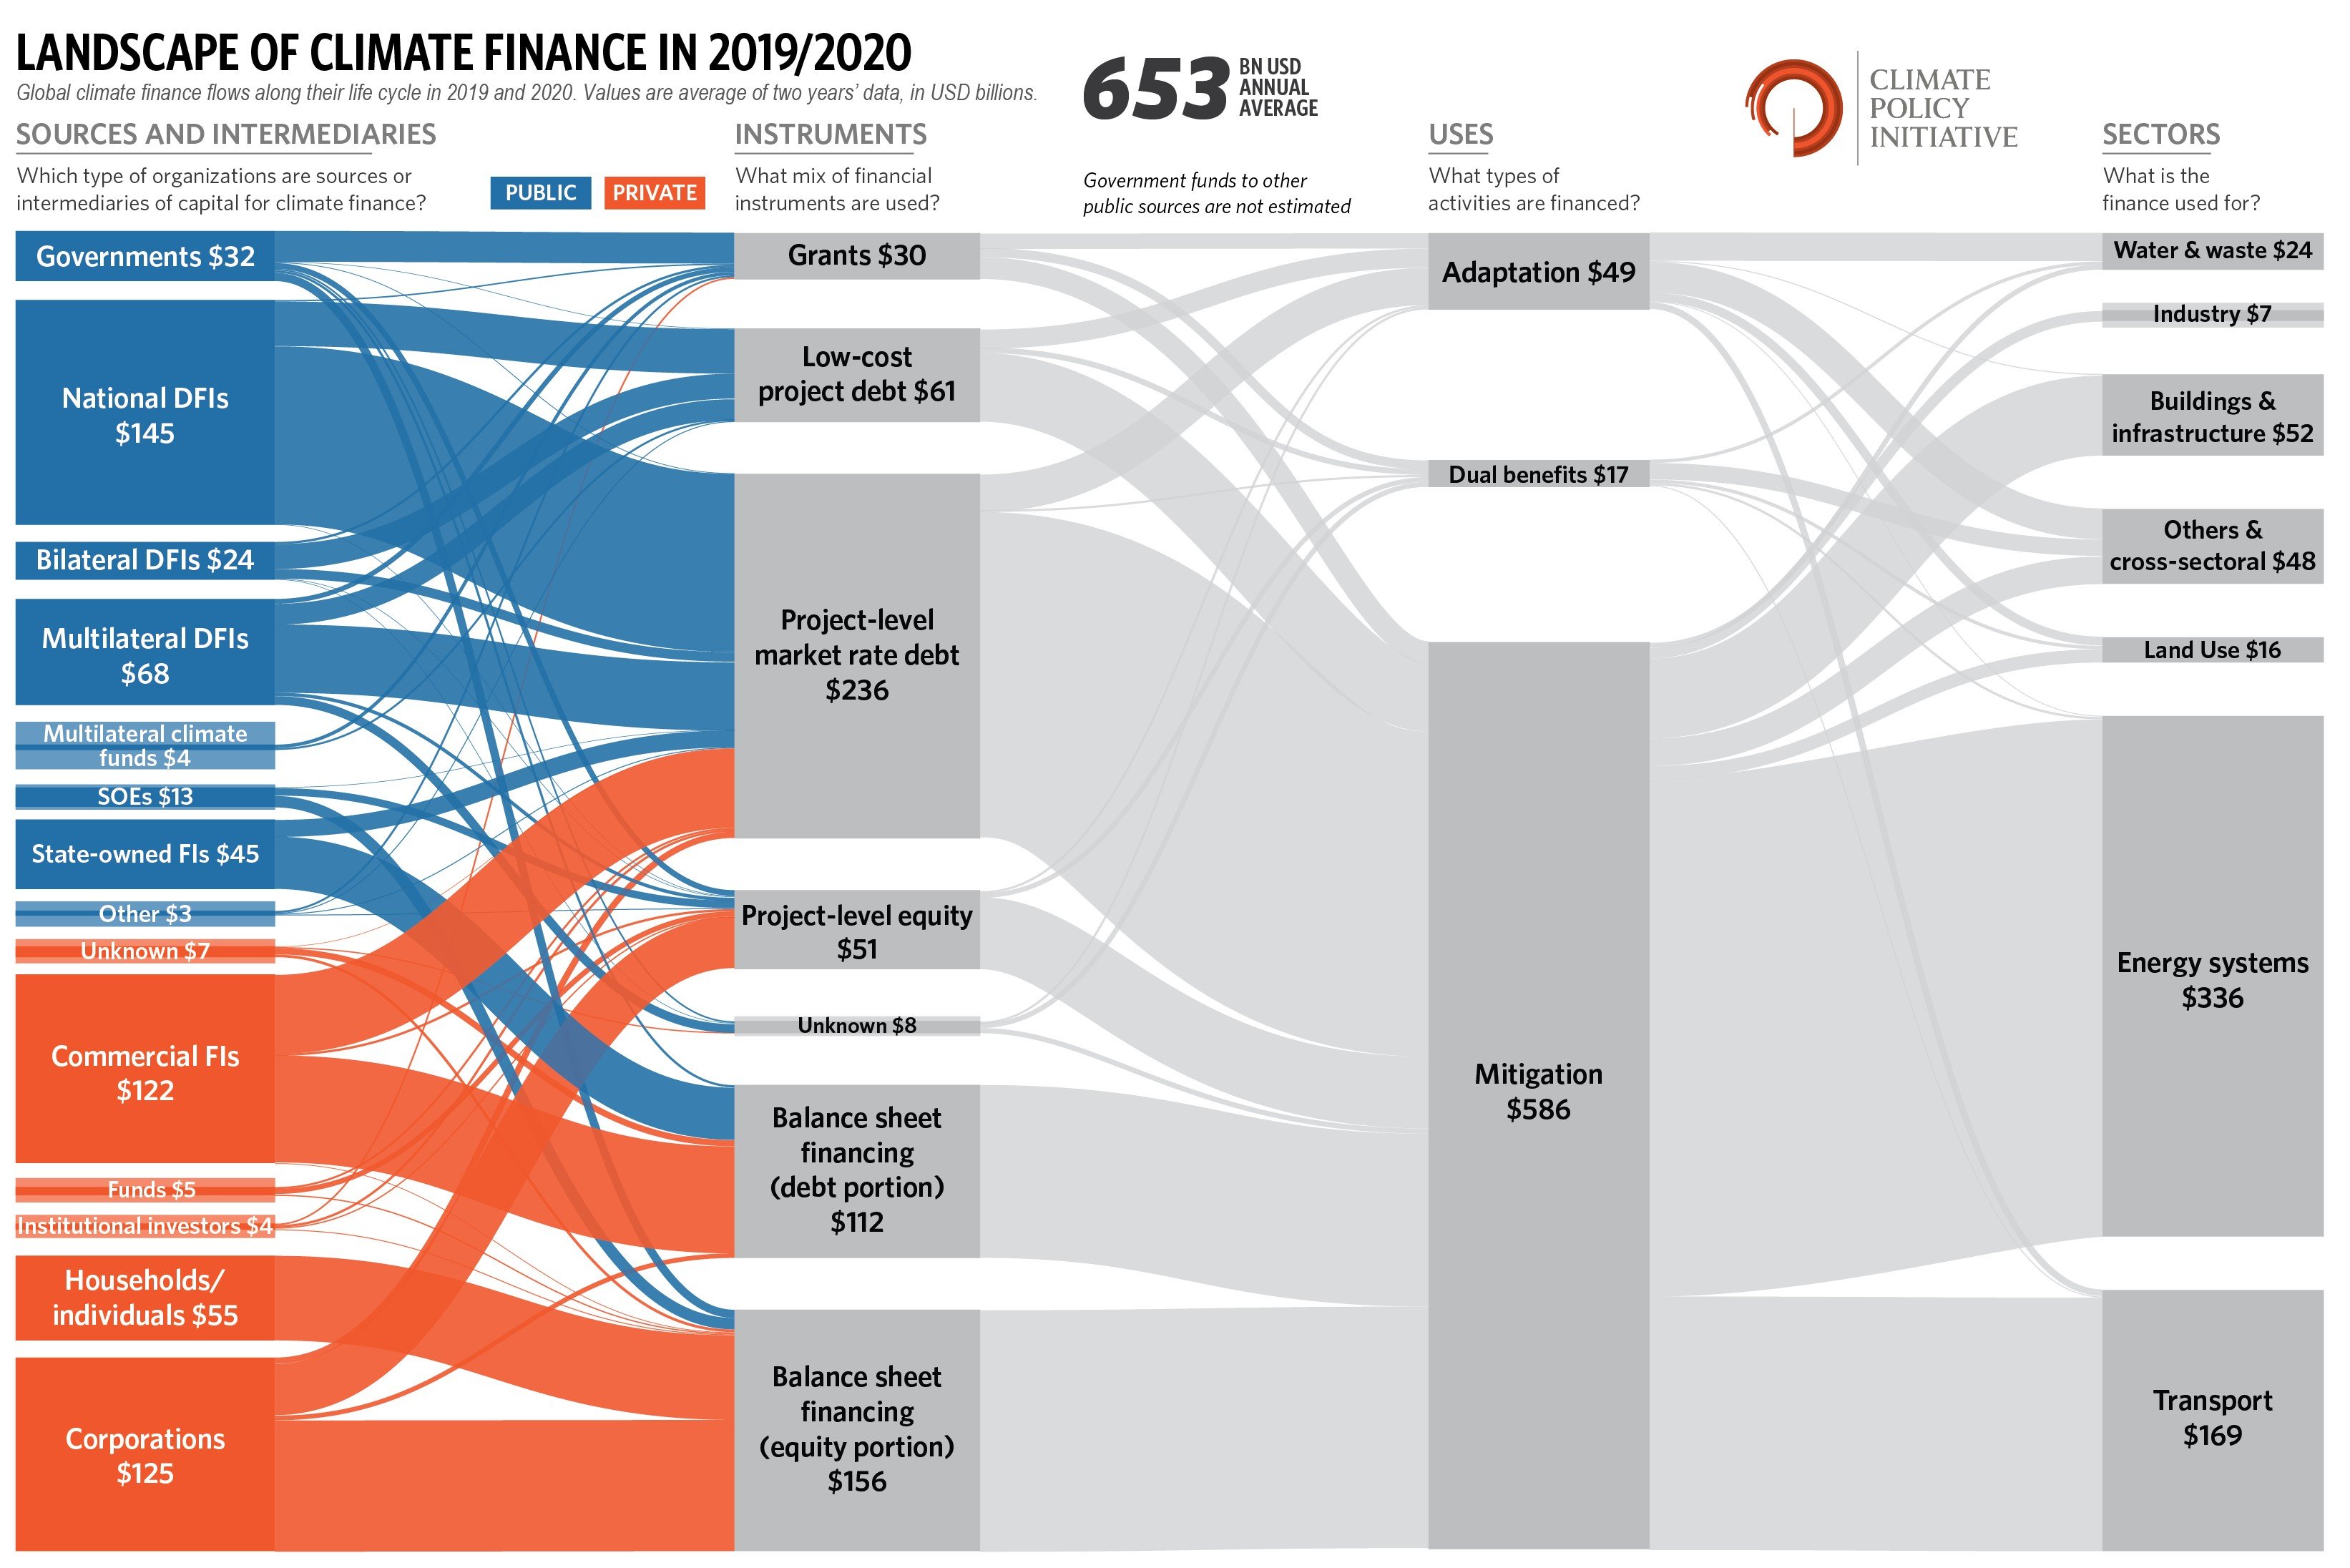 Graph showing landscape of climate finance in 2019/2020